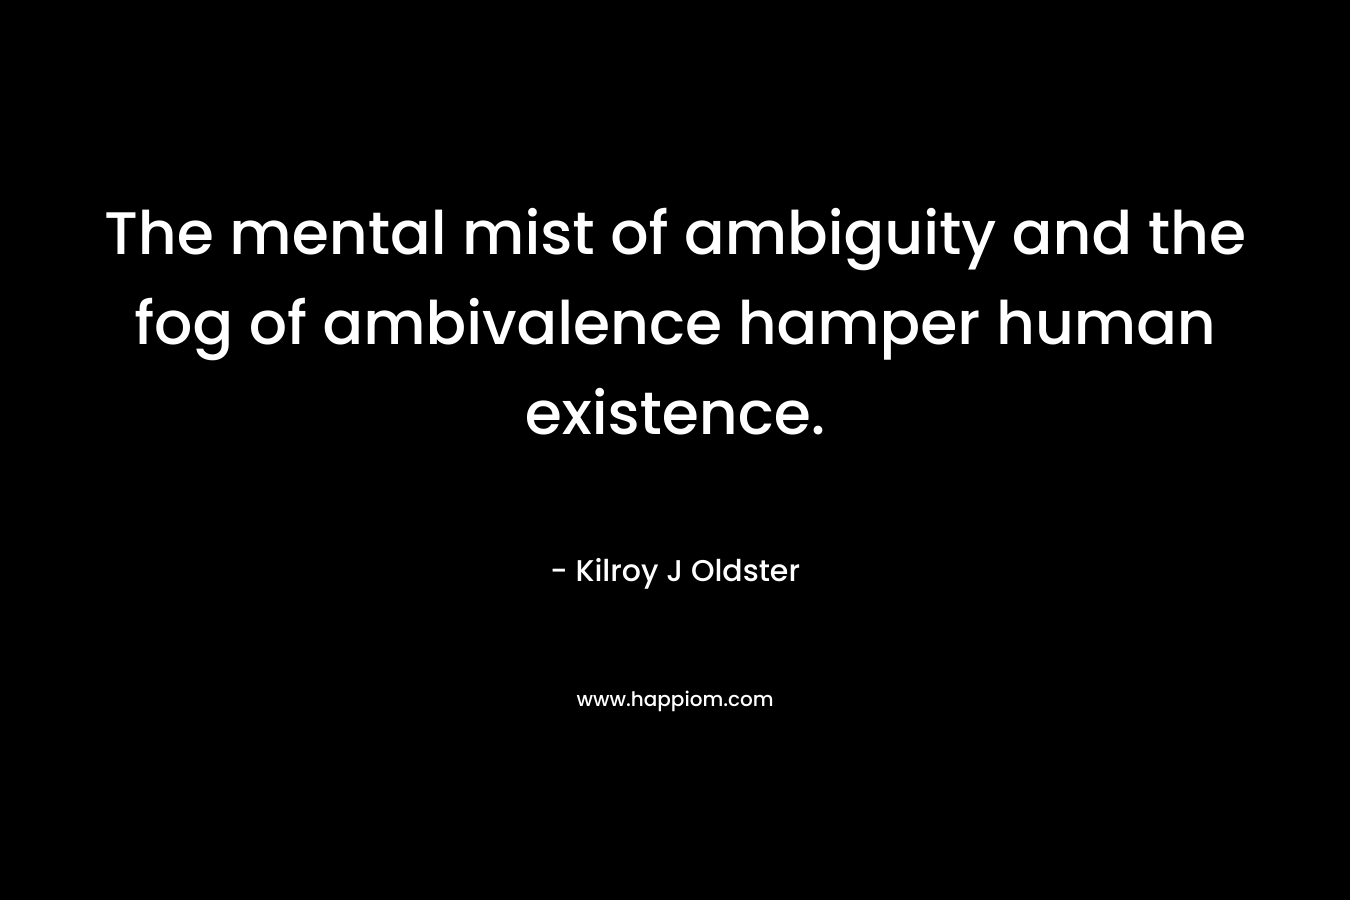 The mental mist of ambiguity and the fog of ambivalence hamper human existence.